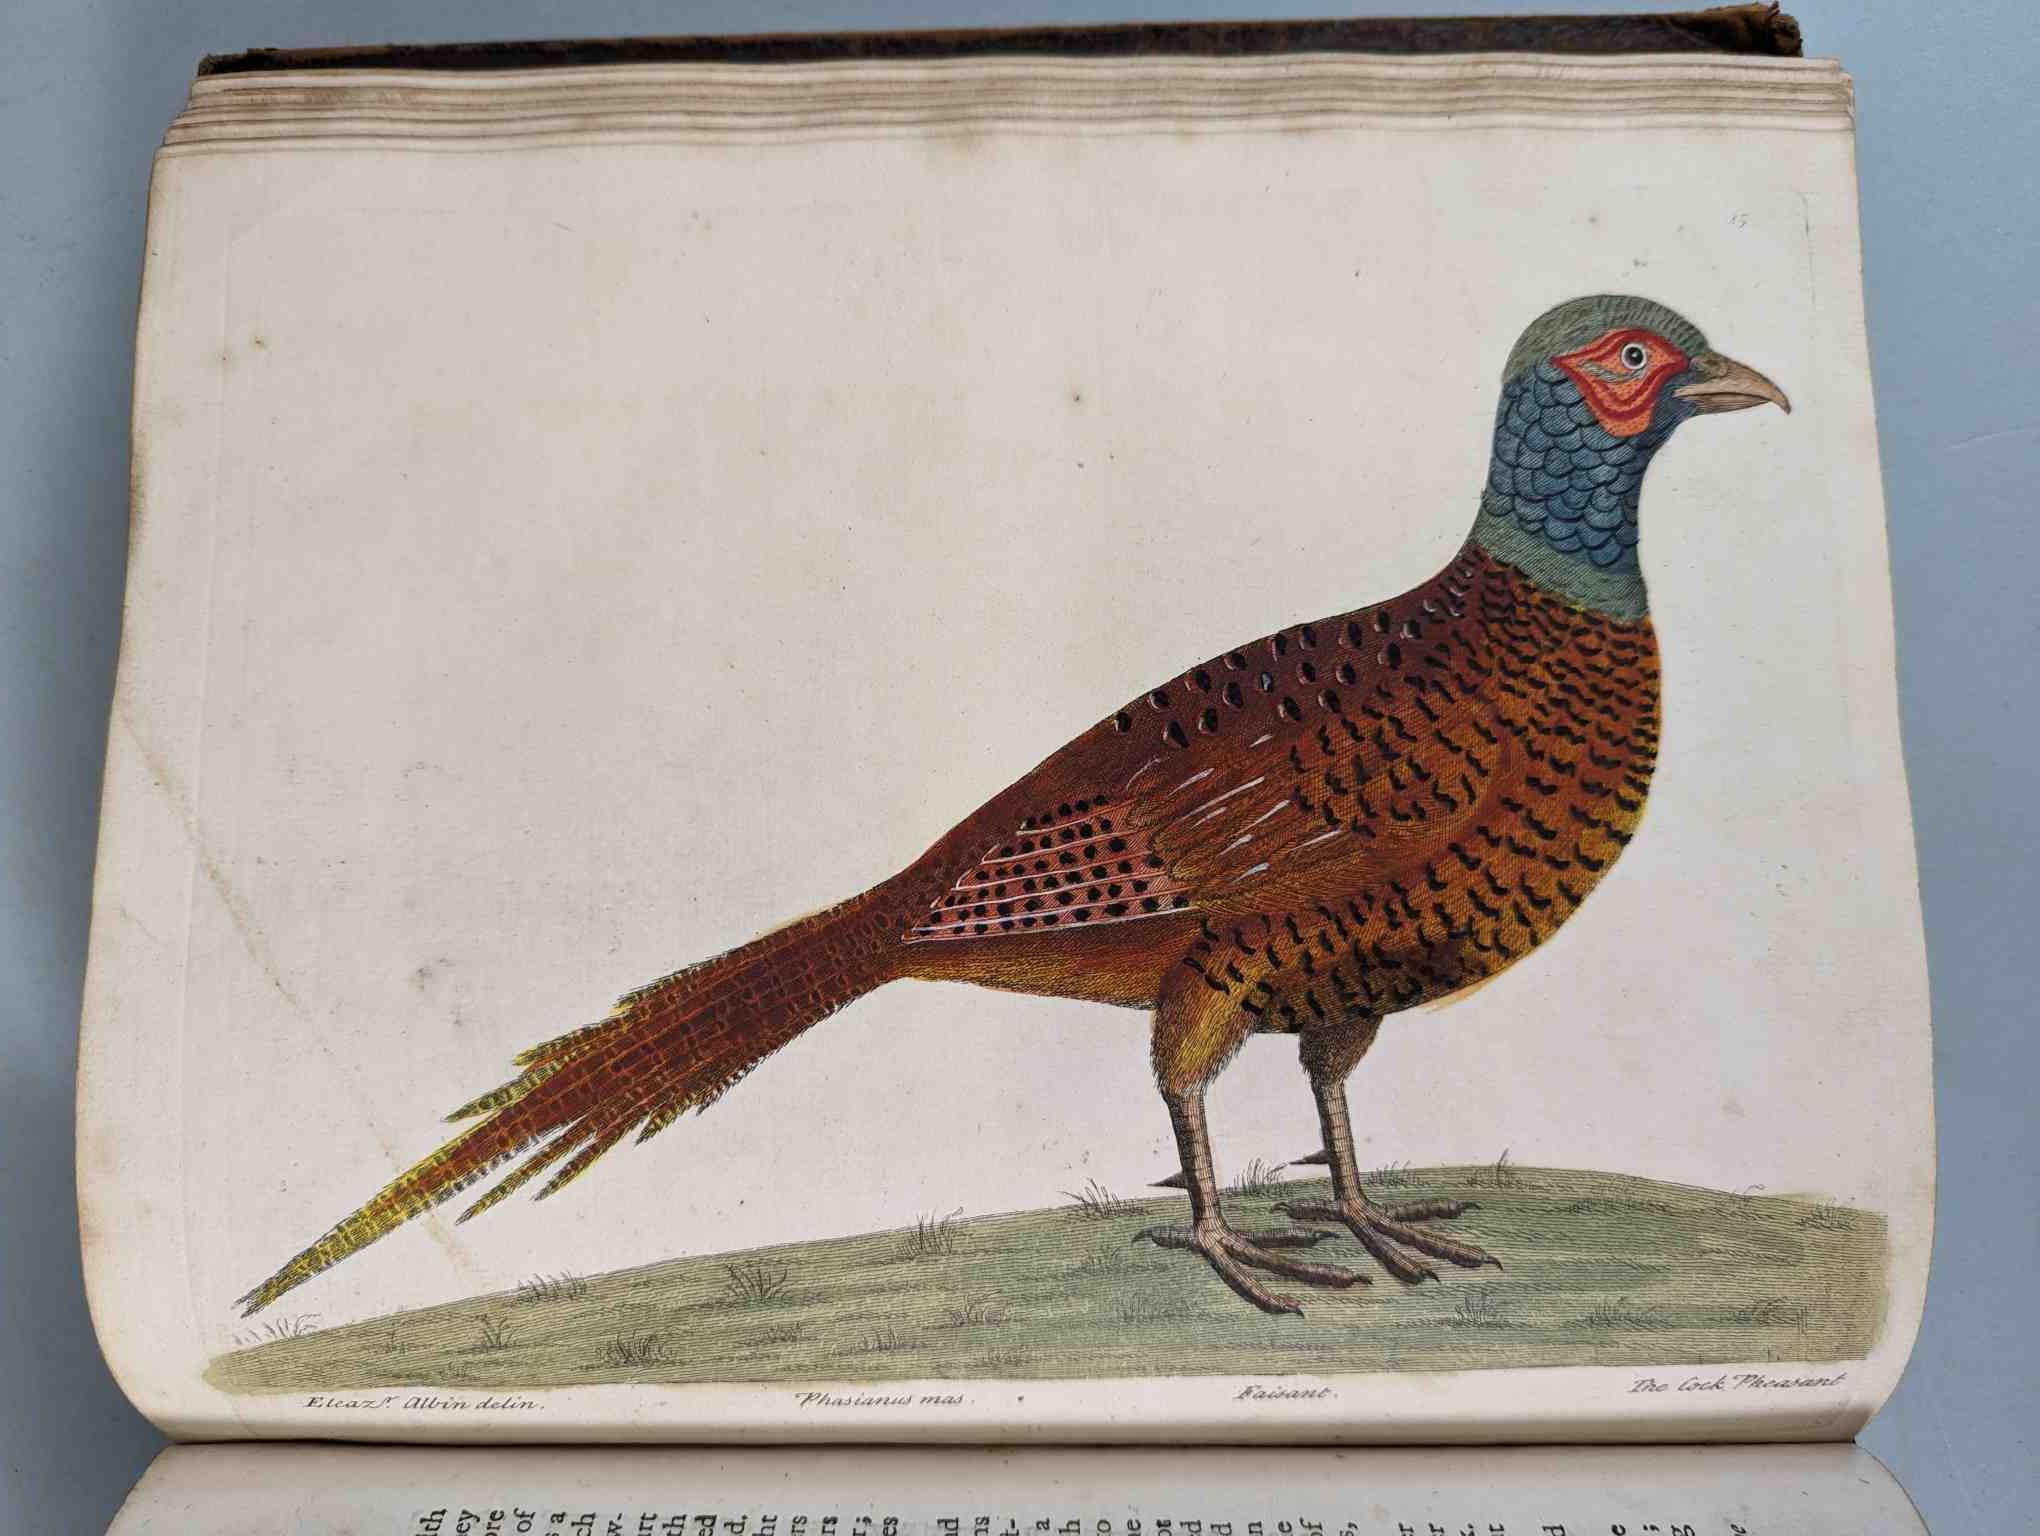 ALBIN, Eleazar. A Natural History of Birds, to which are added, Notes and Observations by W. - Image 28 of 208